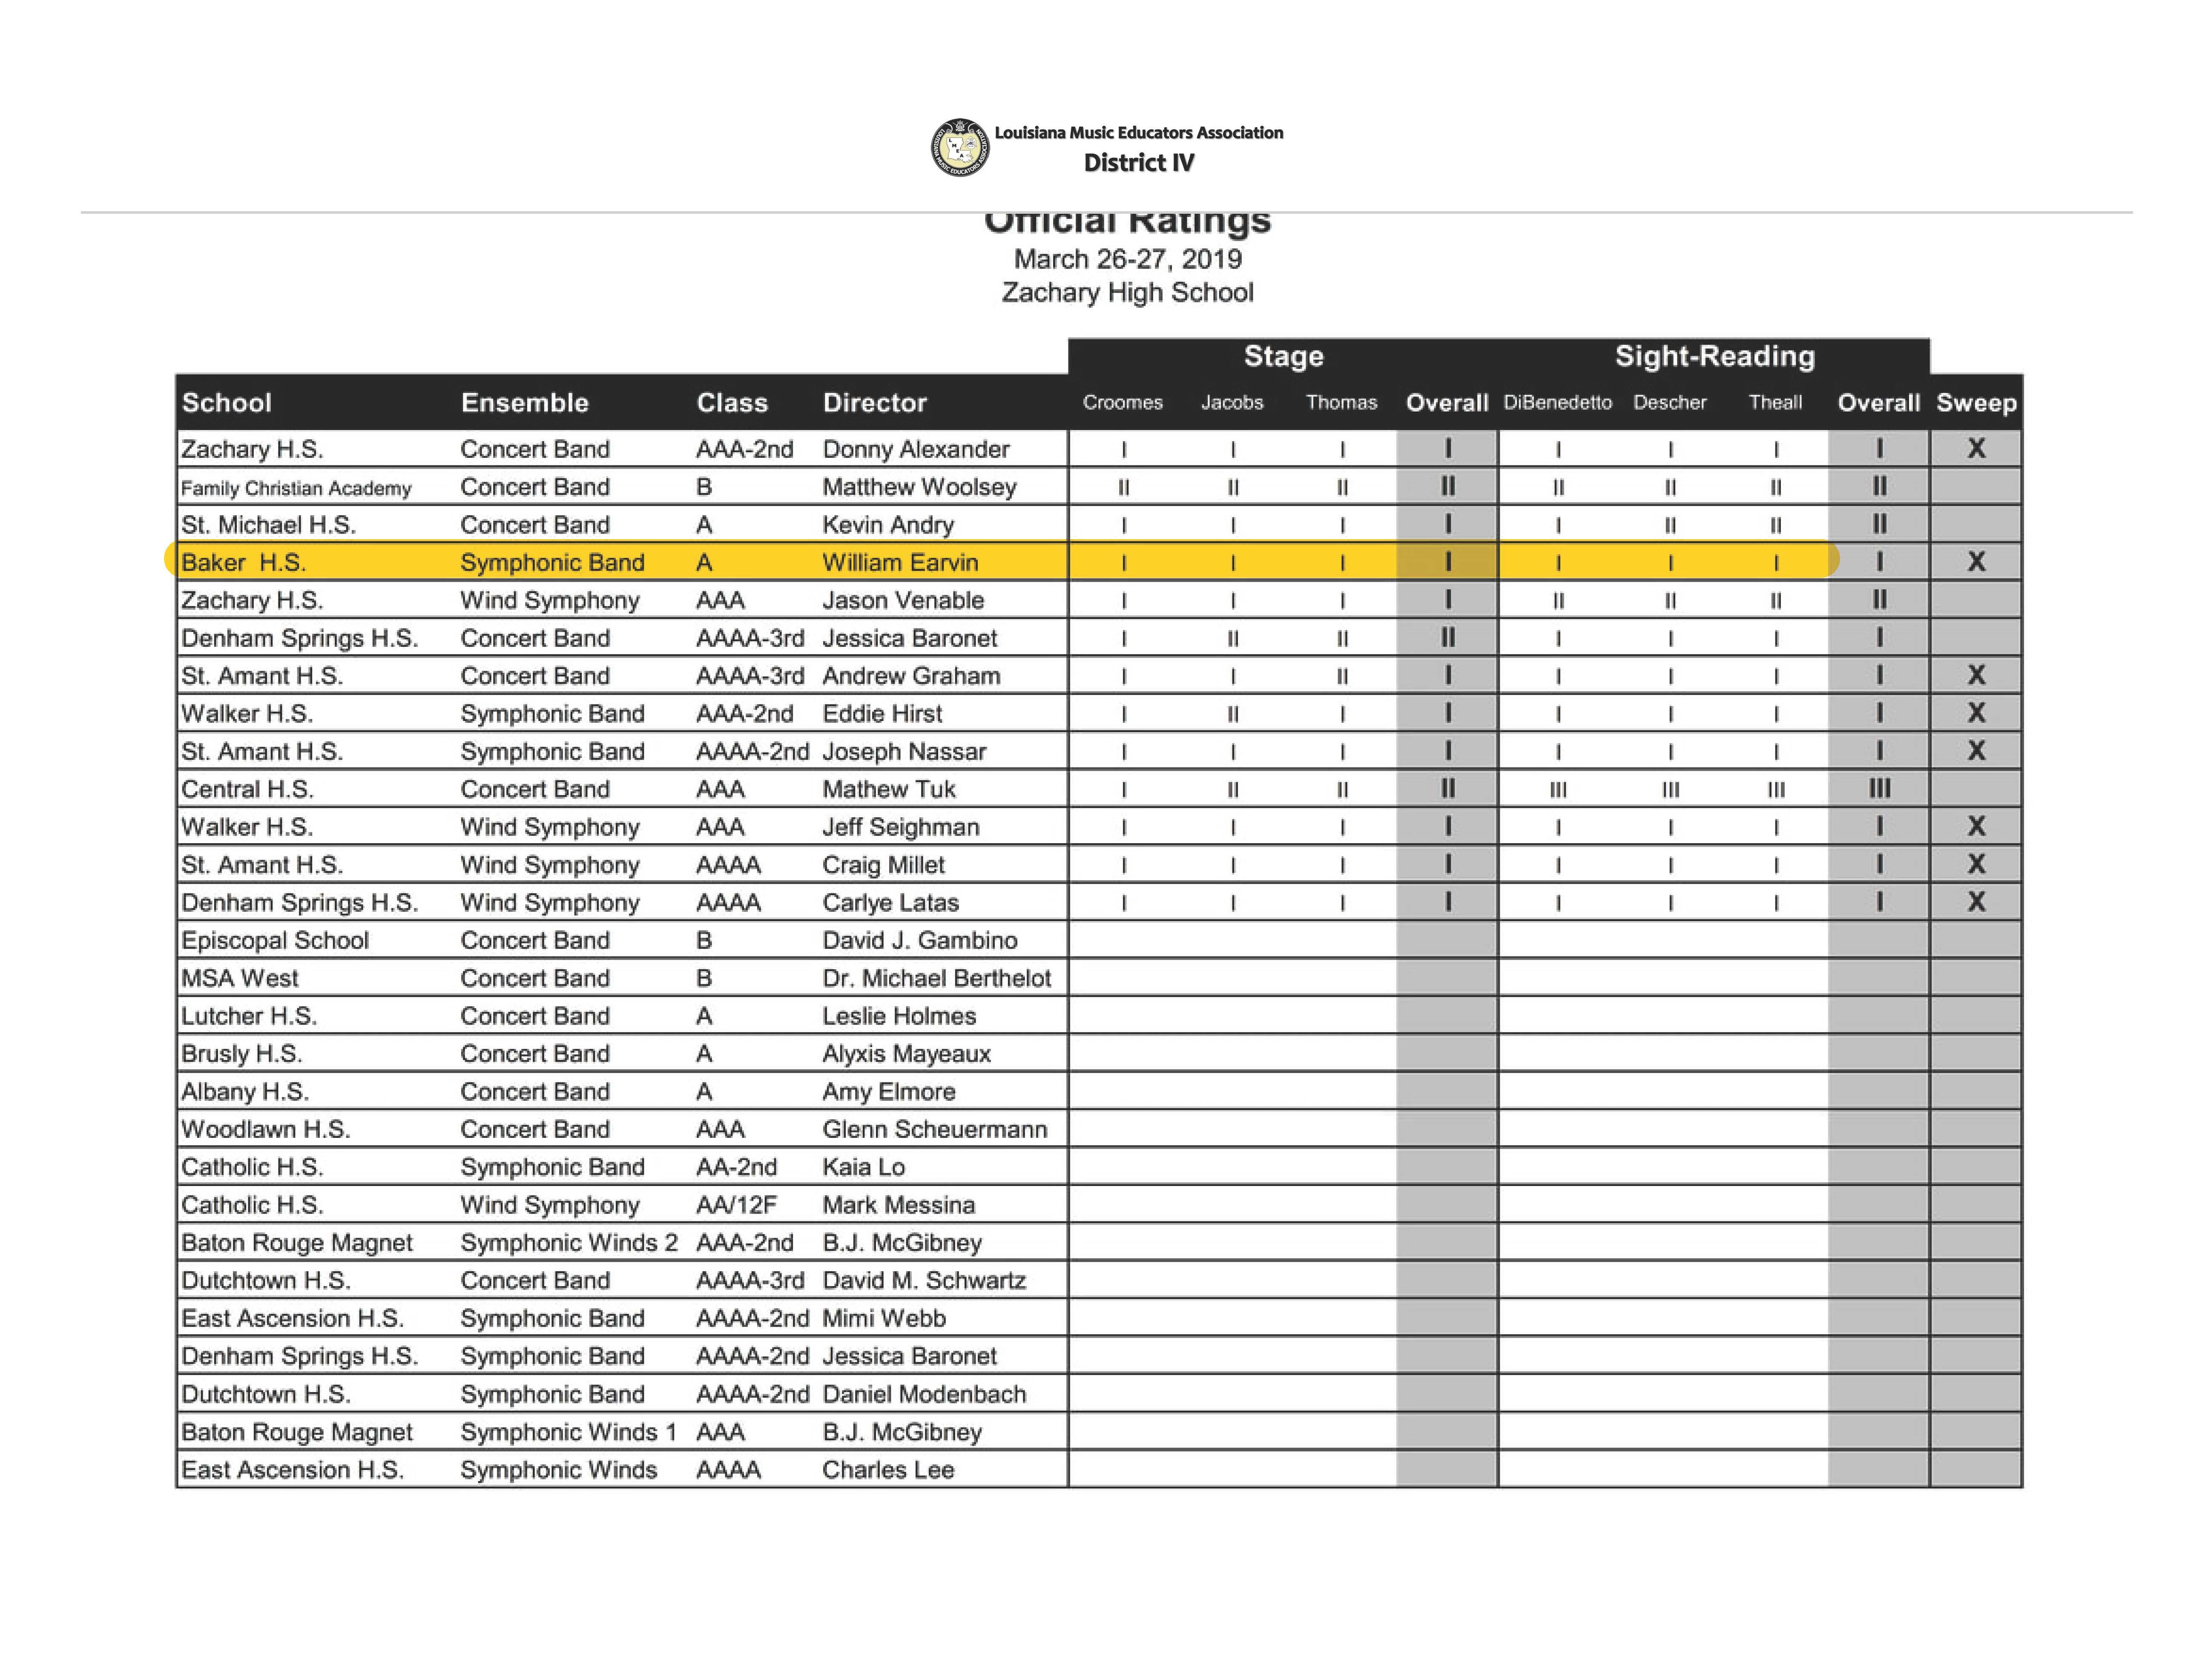 a photo of the LMEA District IV scoring chart for Band Performances